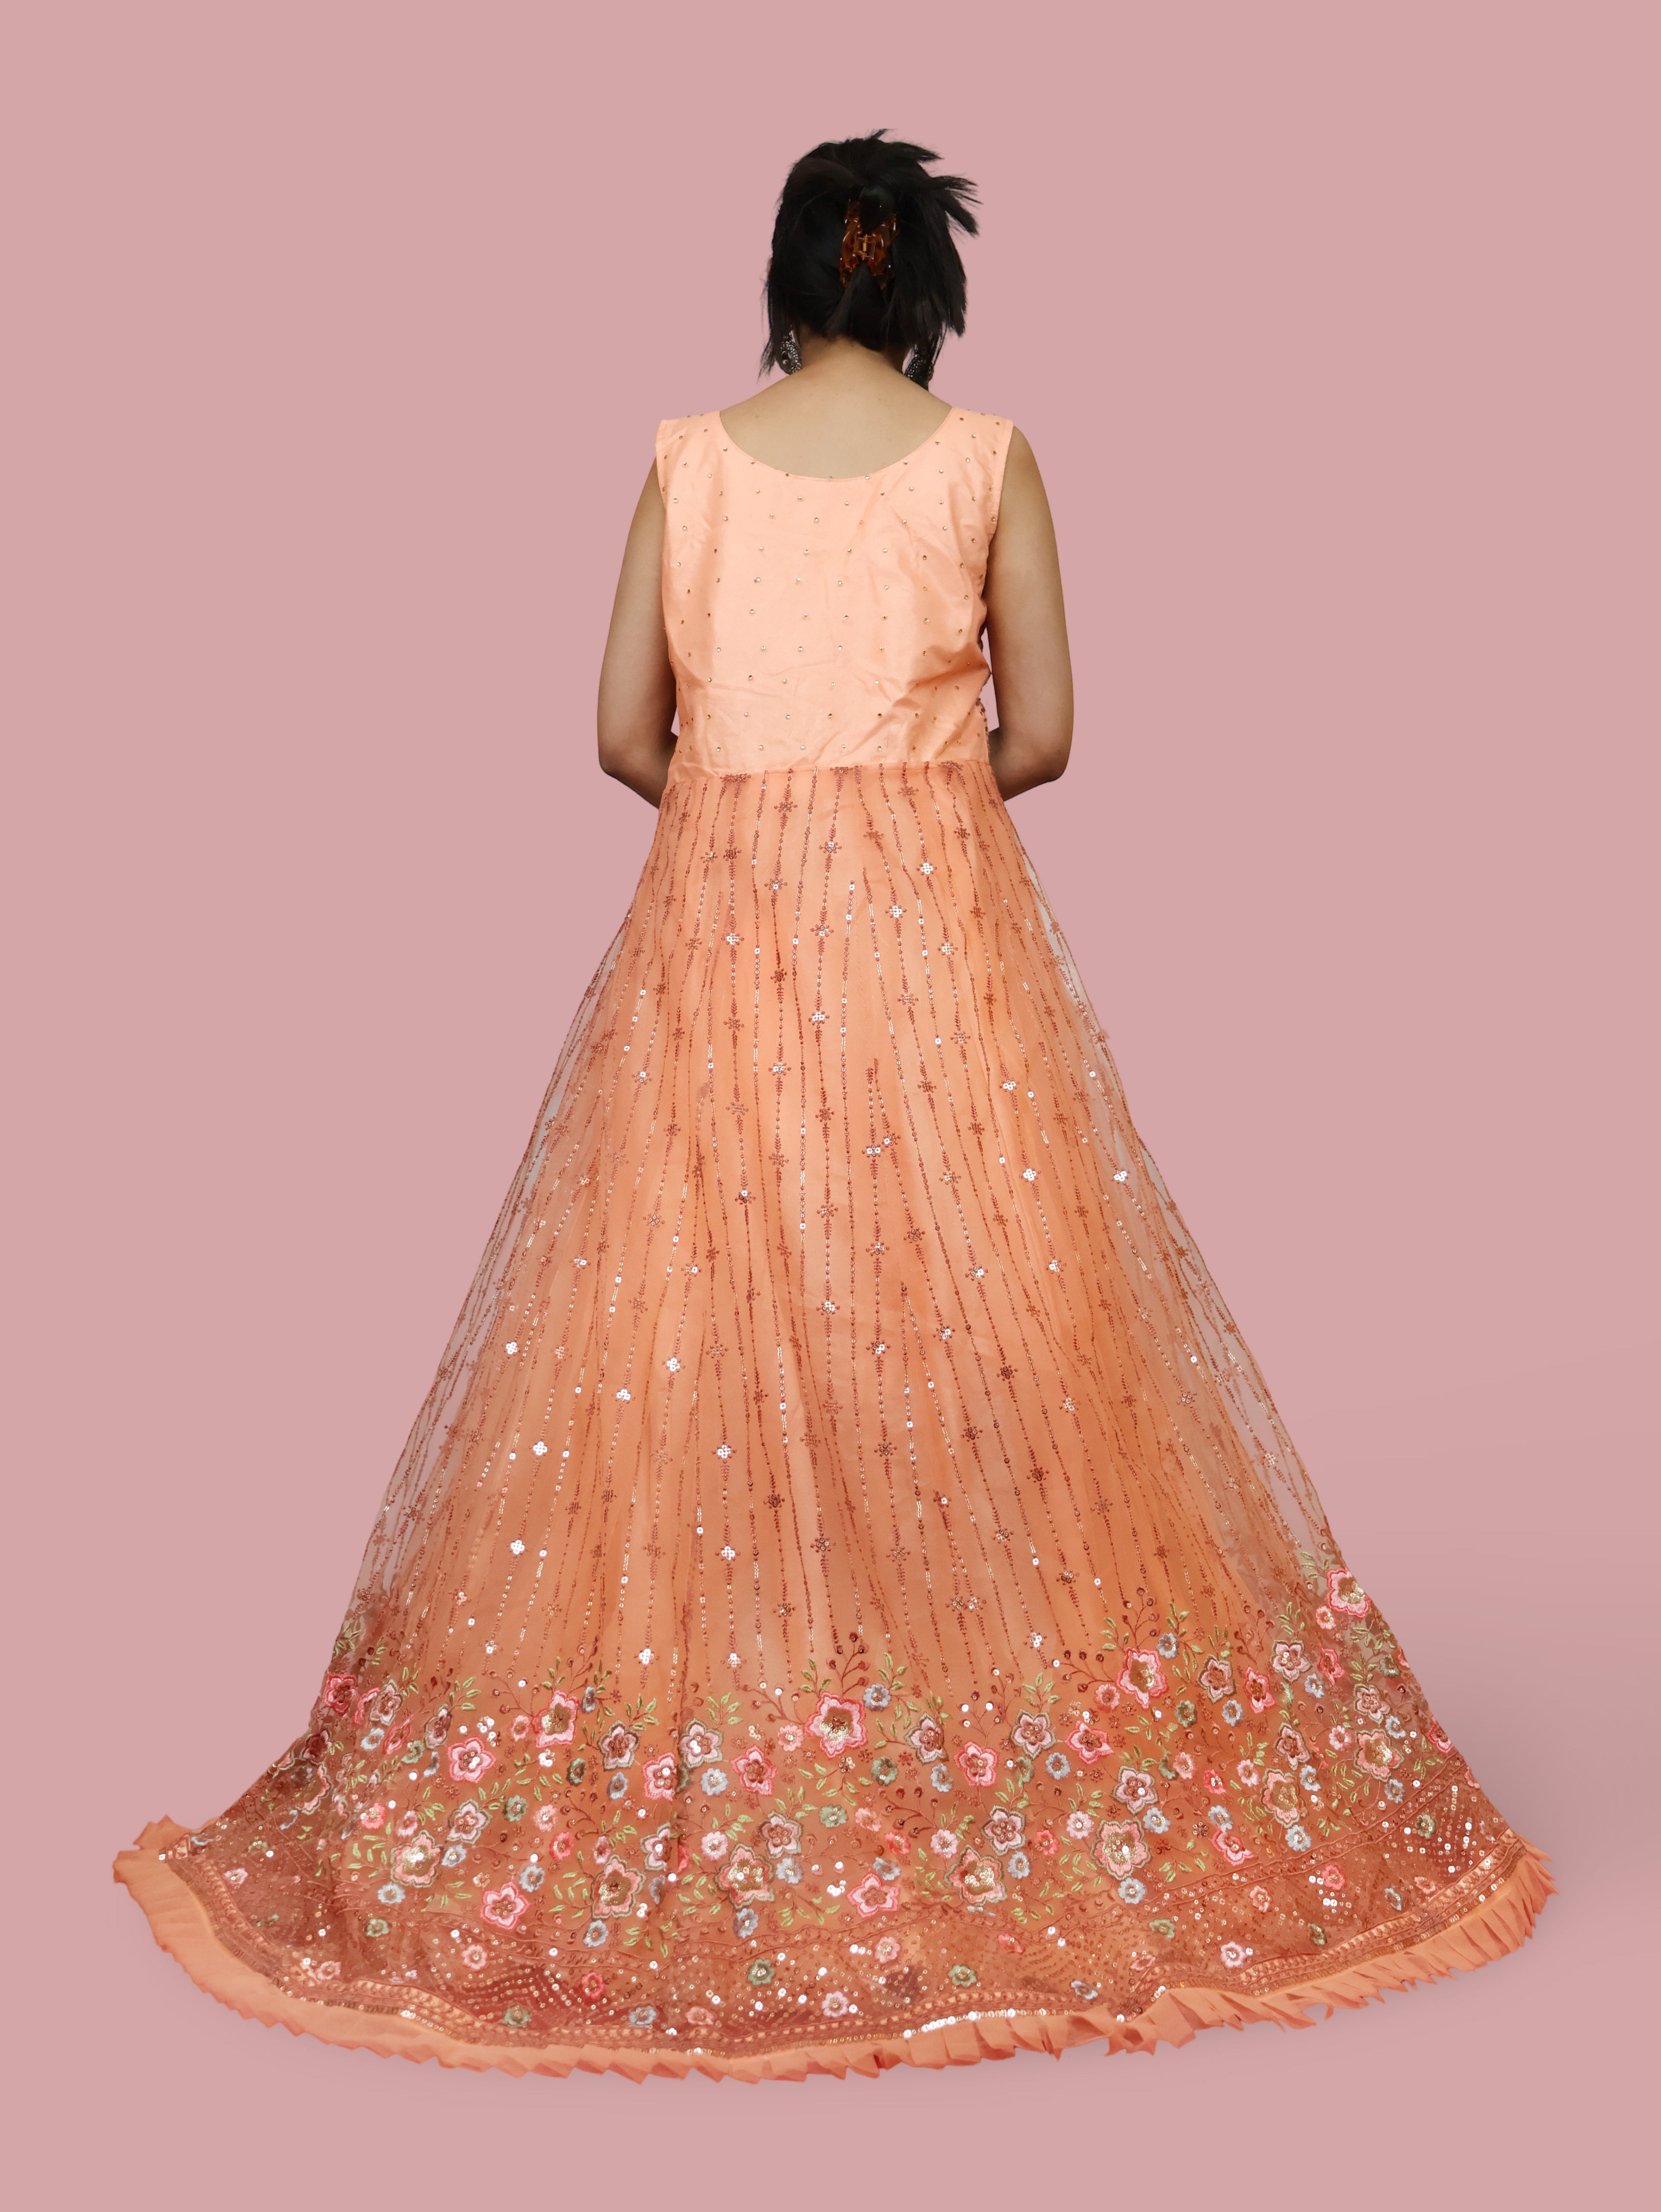 Peach Gown with Embroidery &amp; Sequin Work by Shreekama Peach Designer Gowns for Party Festival Wedding Occasion in Noida